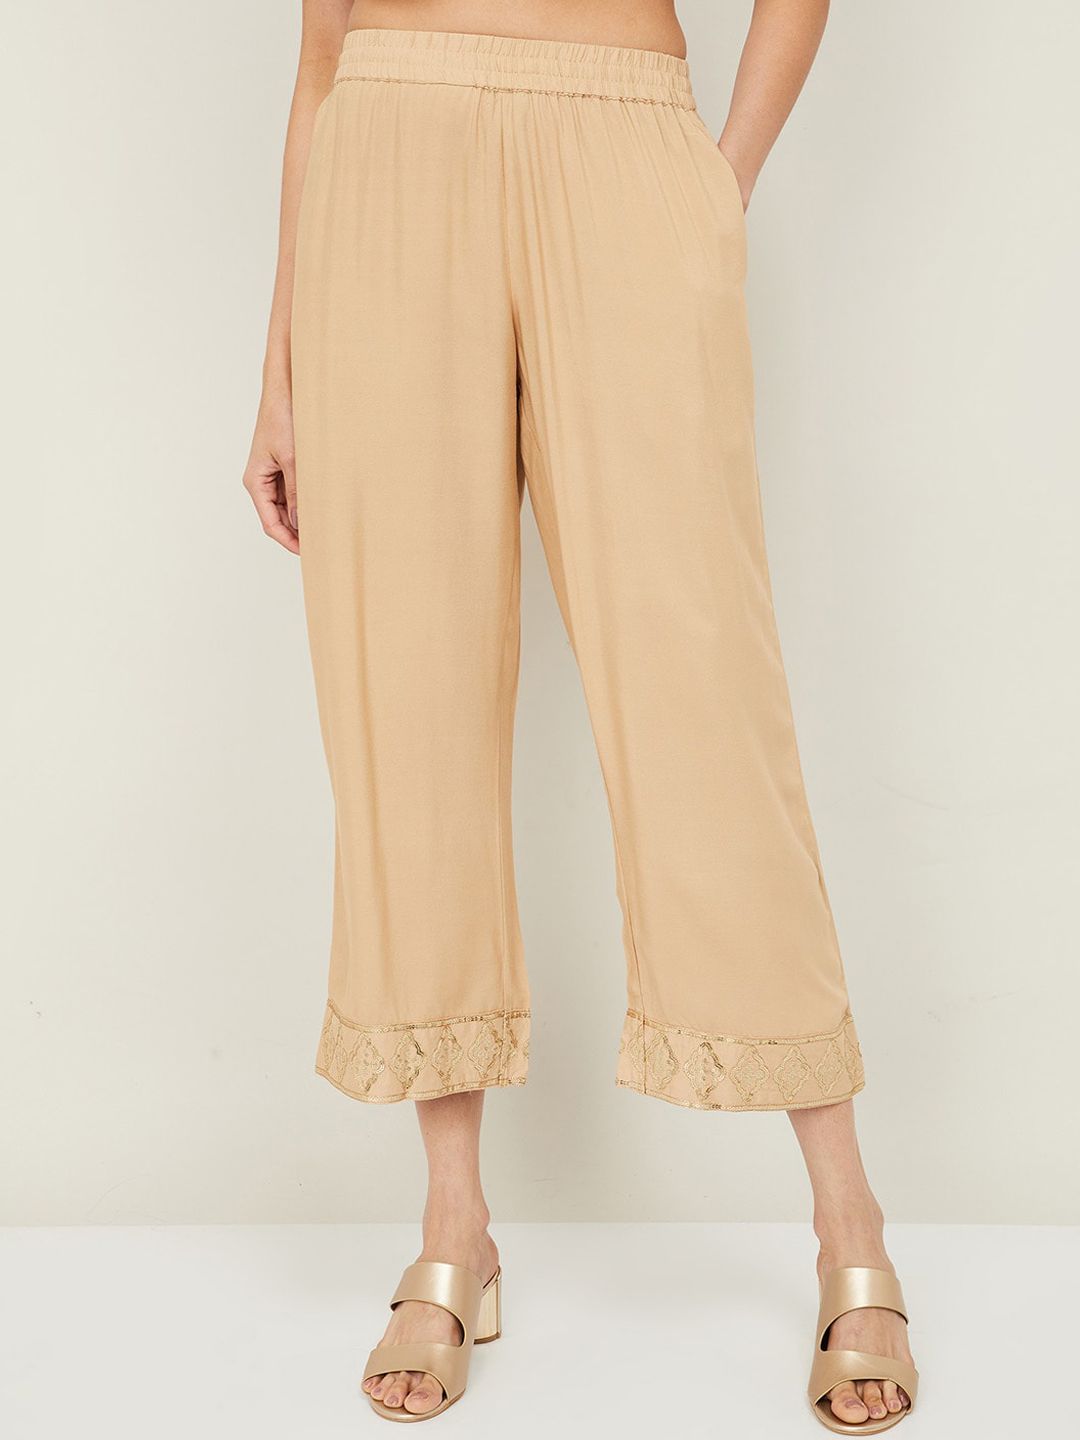 Melange by Lifestyle Women Beige Cotton Trousers Price in India